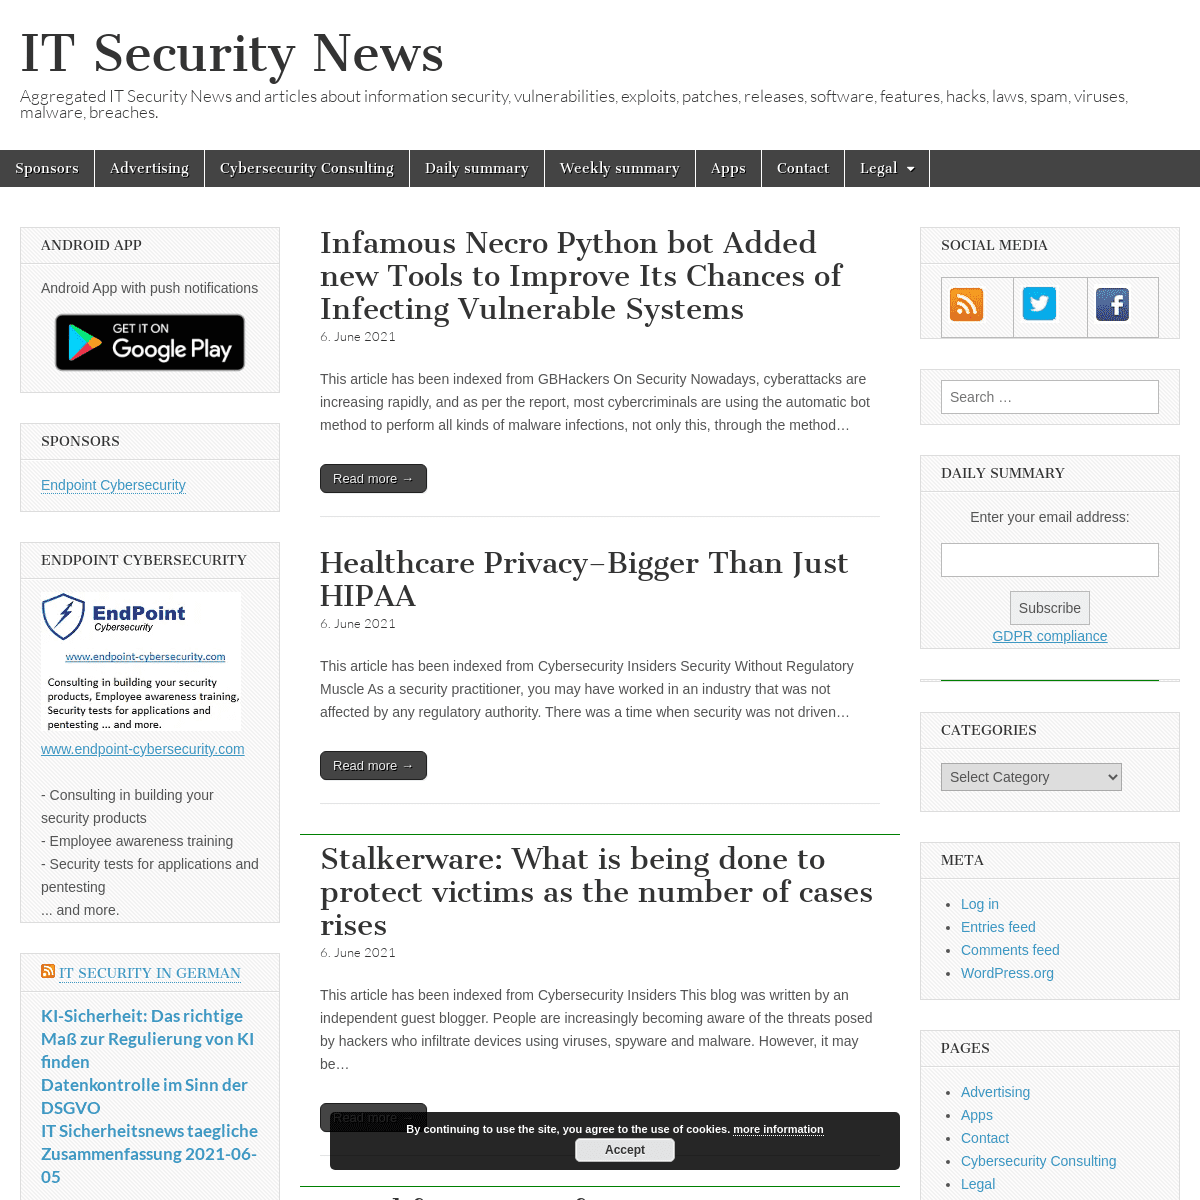 A complete backup of https://itsecuritynews.info